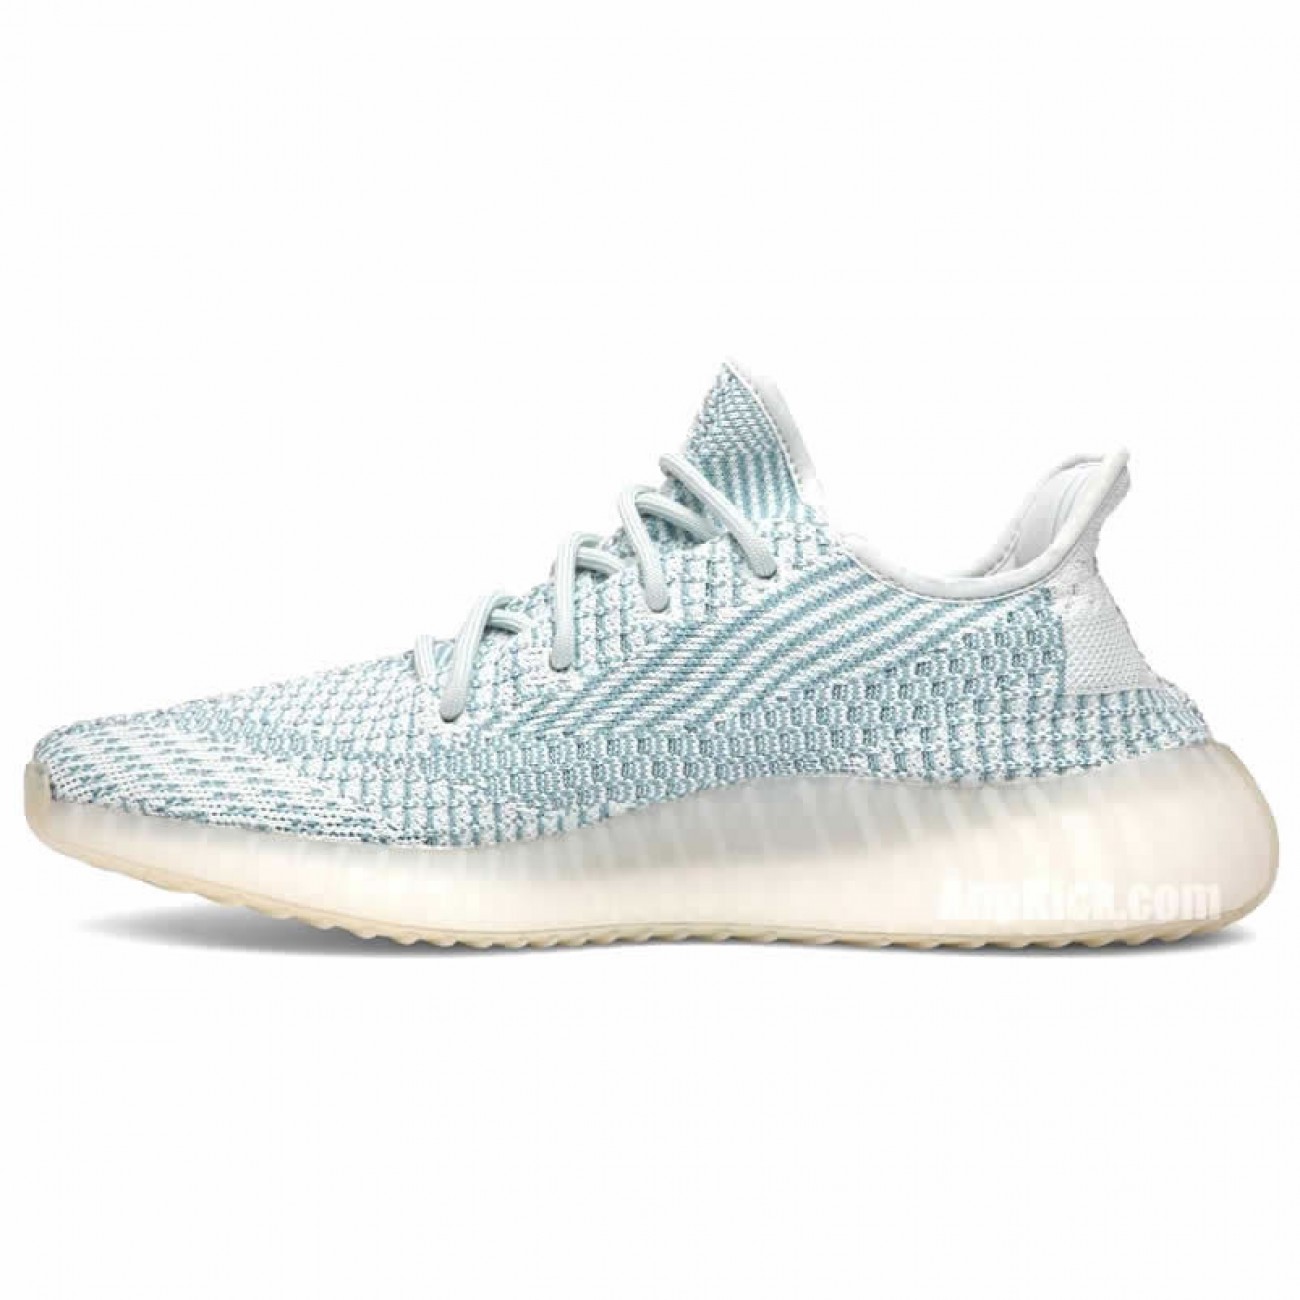 Adidas Yeezy Boost 350 V2 "Cloud White" Non-Reflective FW3043